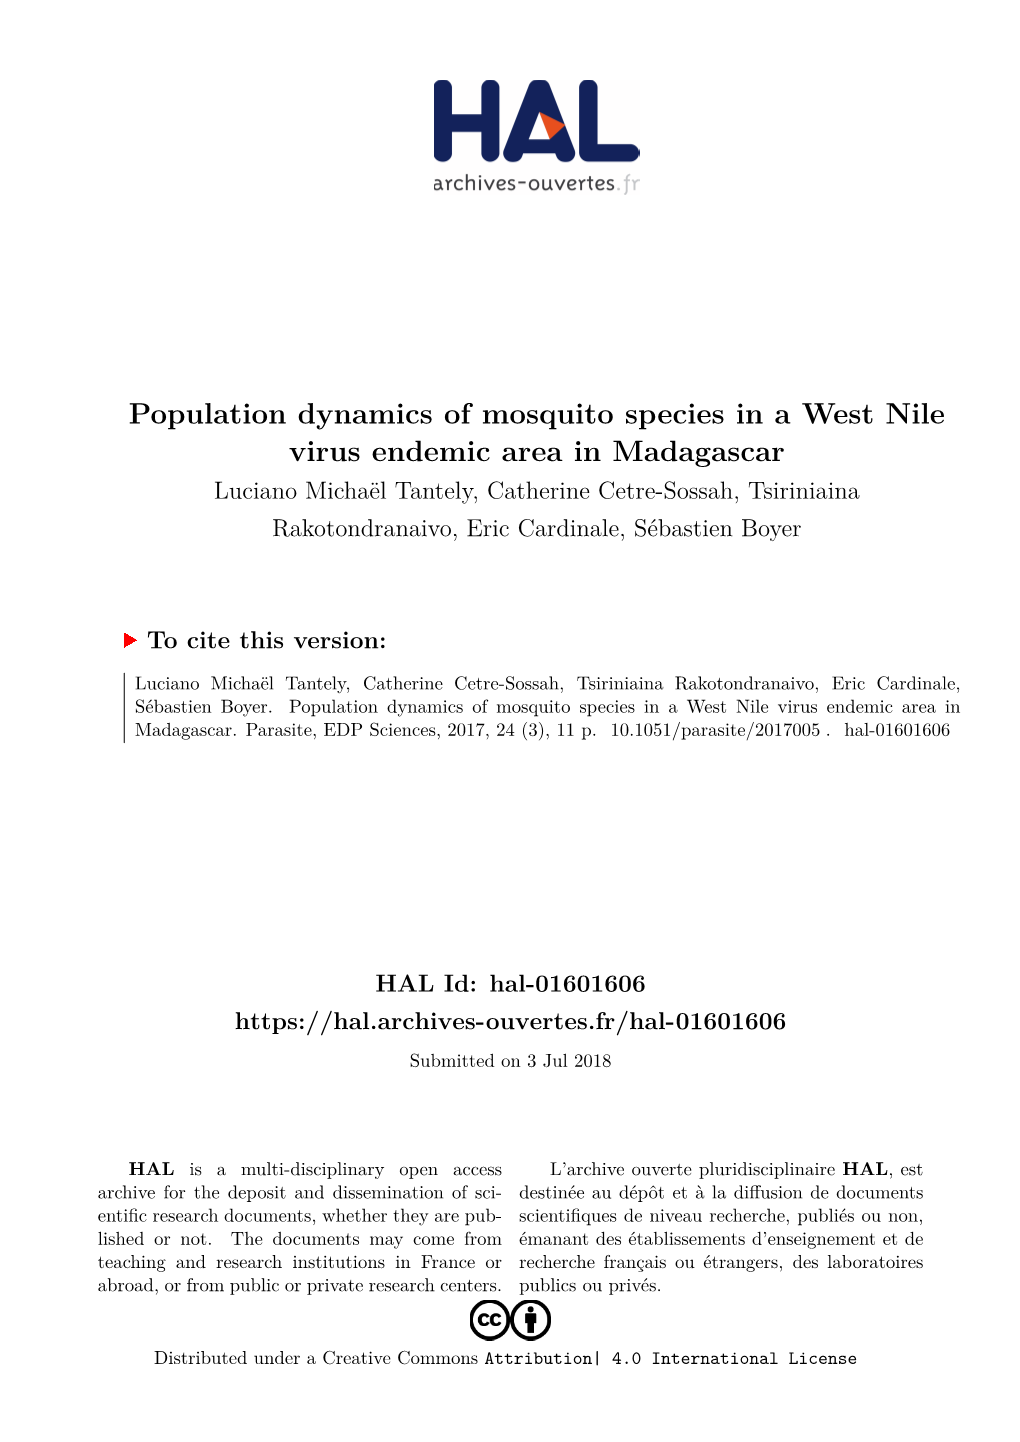 Population Dynamics of Mosquito Species in a West Nile Virus